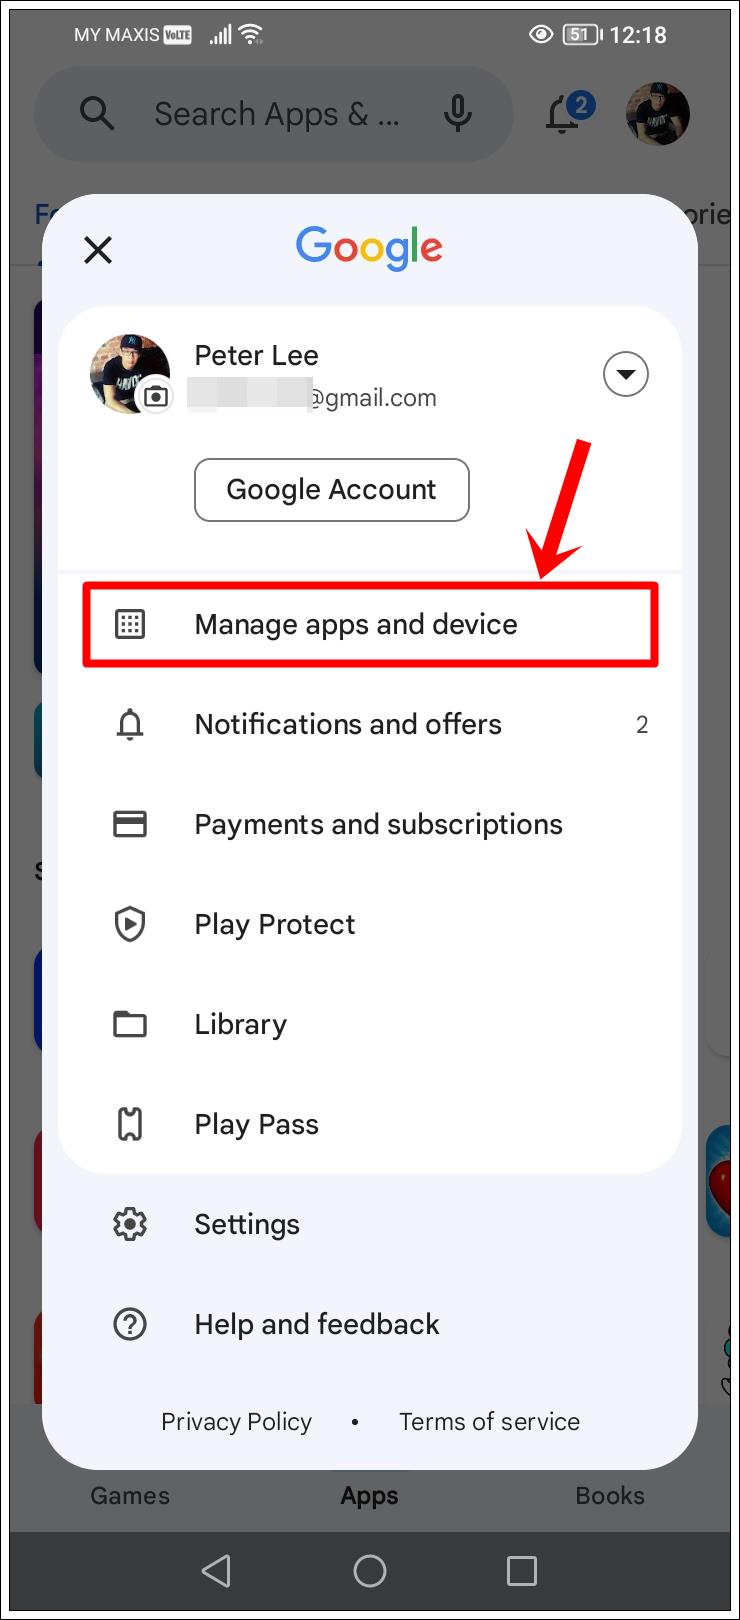 This image shows a screenshot of the user's Google Account Settings on an Android phone. The 'Manage Apps and Device' option is highlighted.